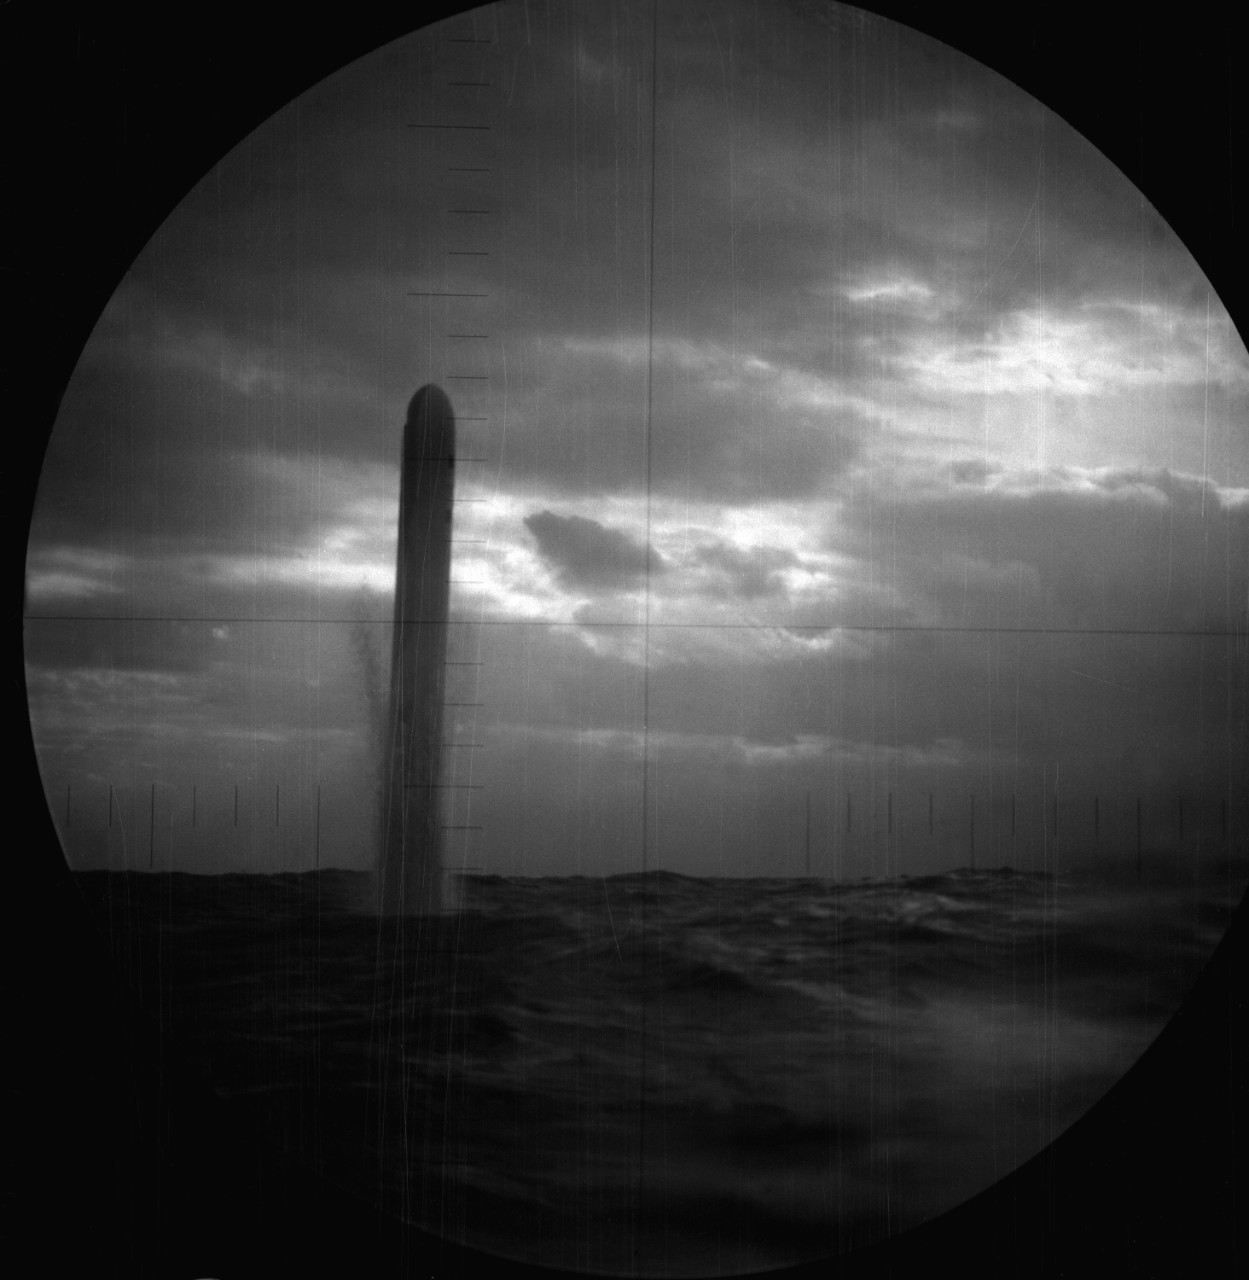 330-CFD-DN-SN-91-08884: BGM-109 Tomahawk land attack missile (TLAM), Operation Desert Storm, 1991. As seen through USS Pittsburgh’s (SSN-720) periscope and targeted on an Iraqi position. It begins to leave the water following a vertical launch tu...